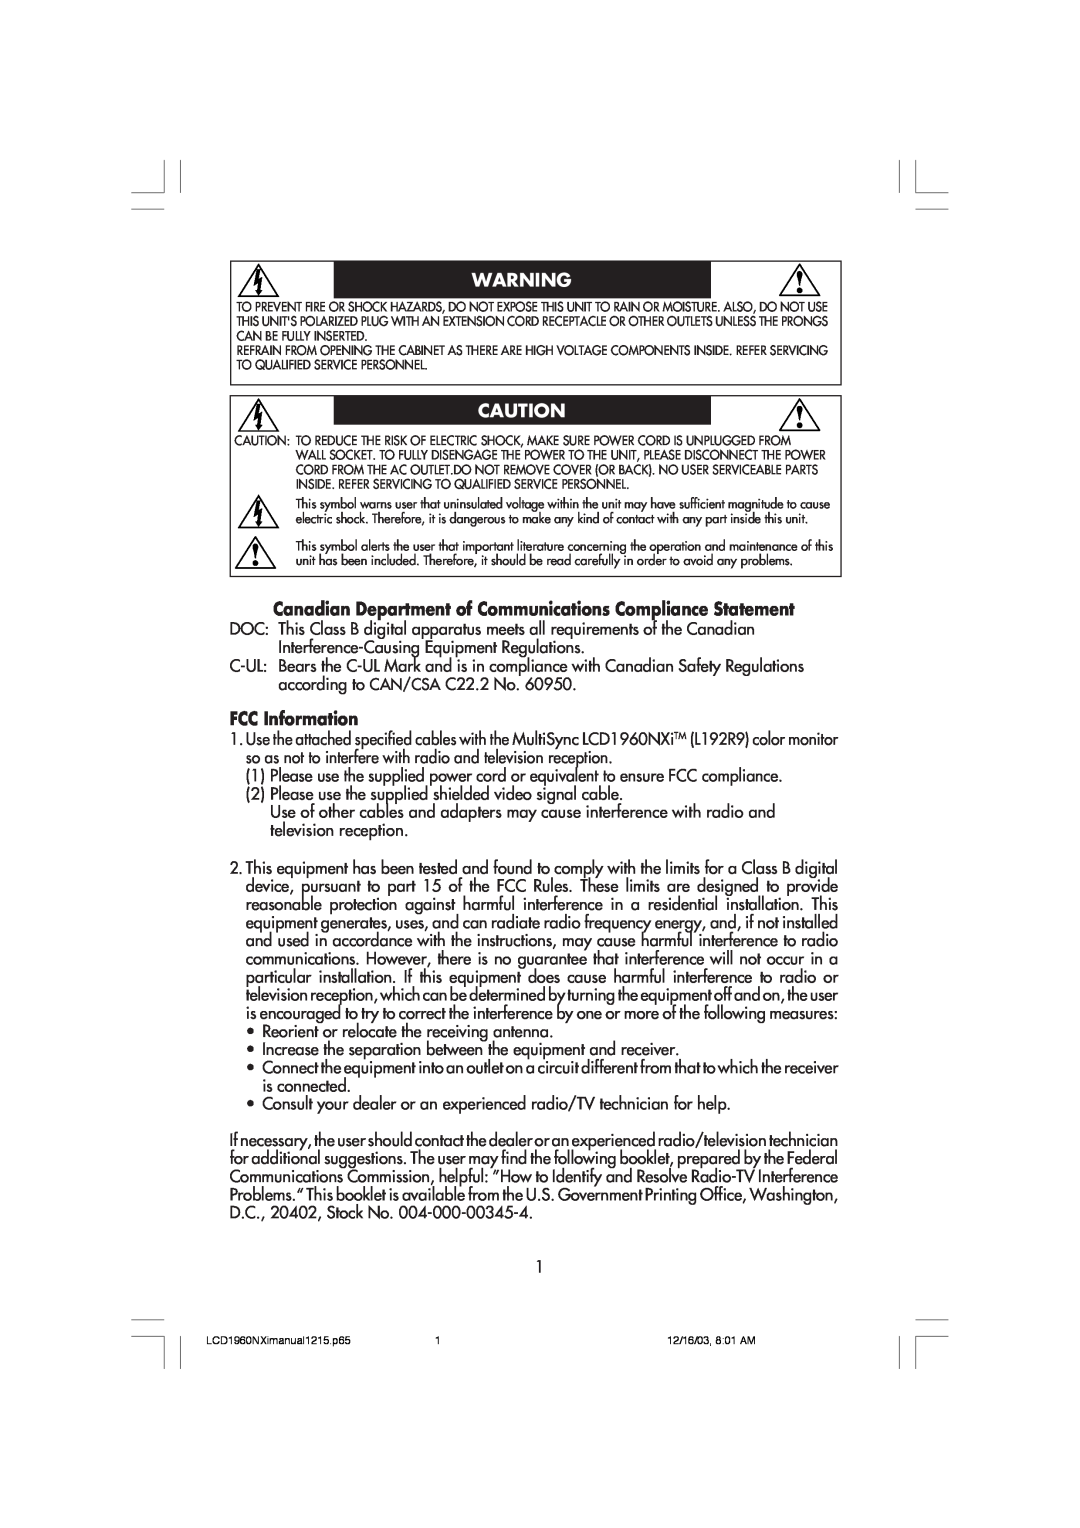 NEC LCD1960NXI manual Canadian Department of Communications Compliance Statement, FCC Information 